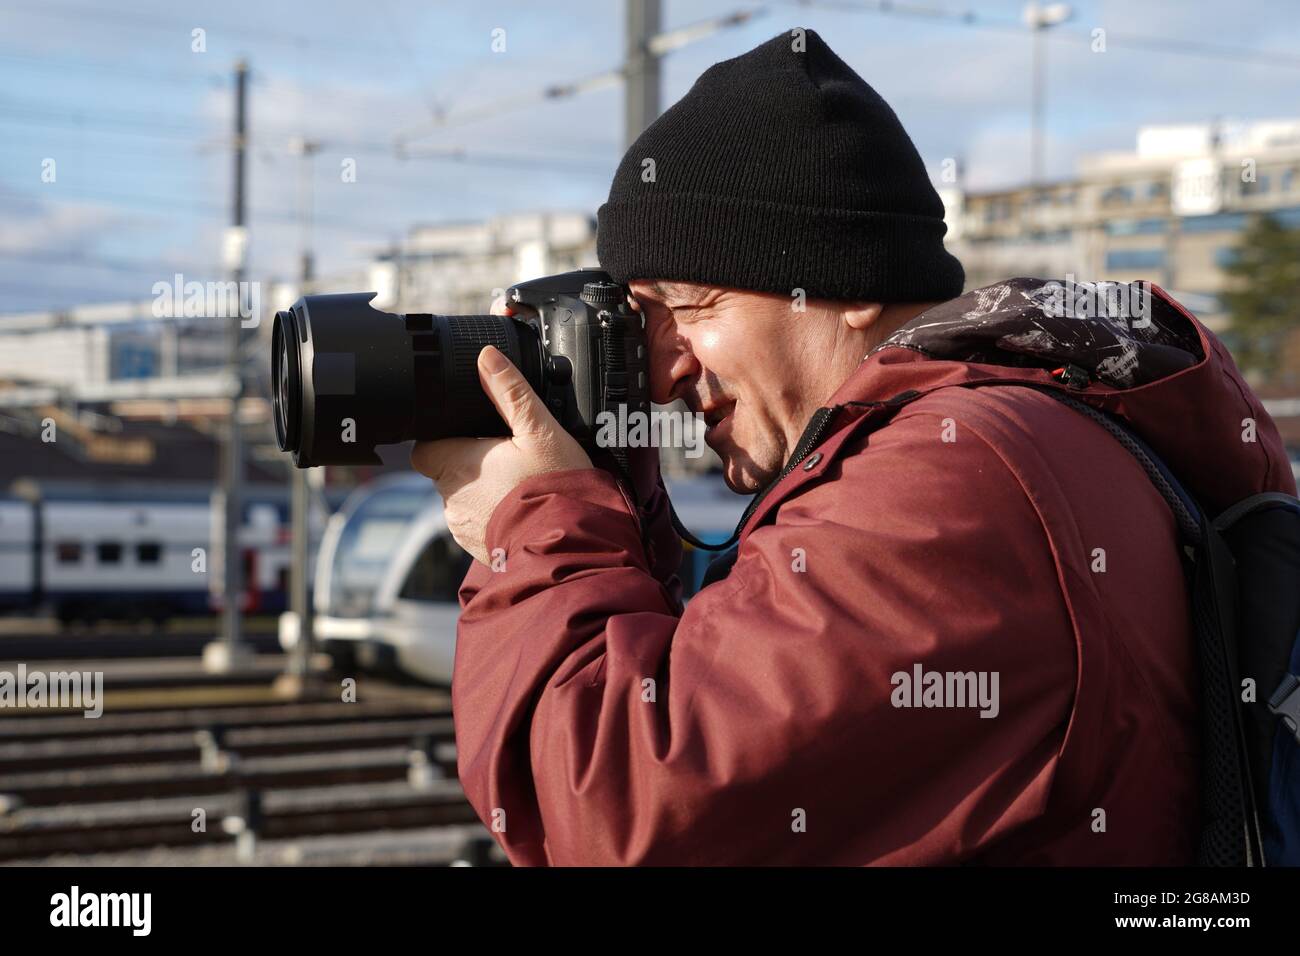 A man taking photos of trains in winter. Side view photo. He is wearing a cap and winter jacket. Stock Photo